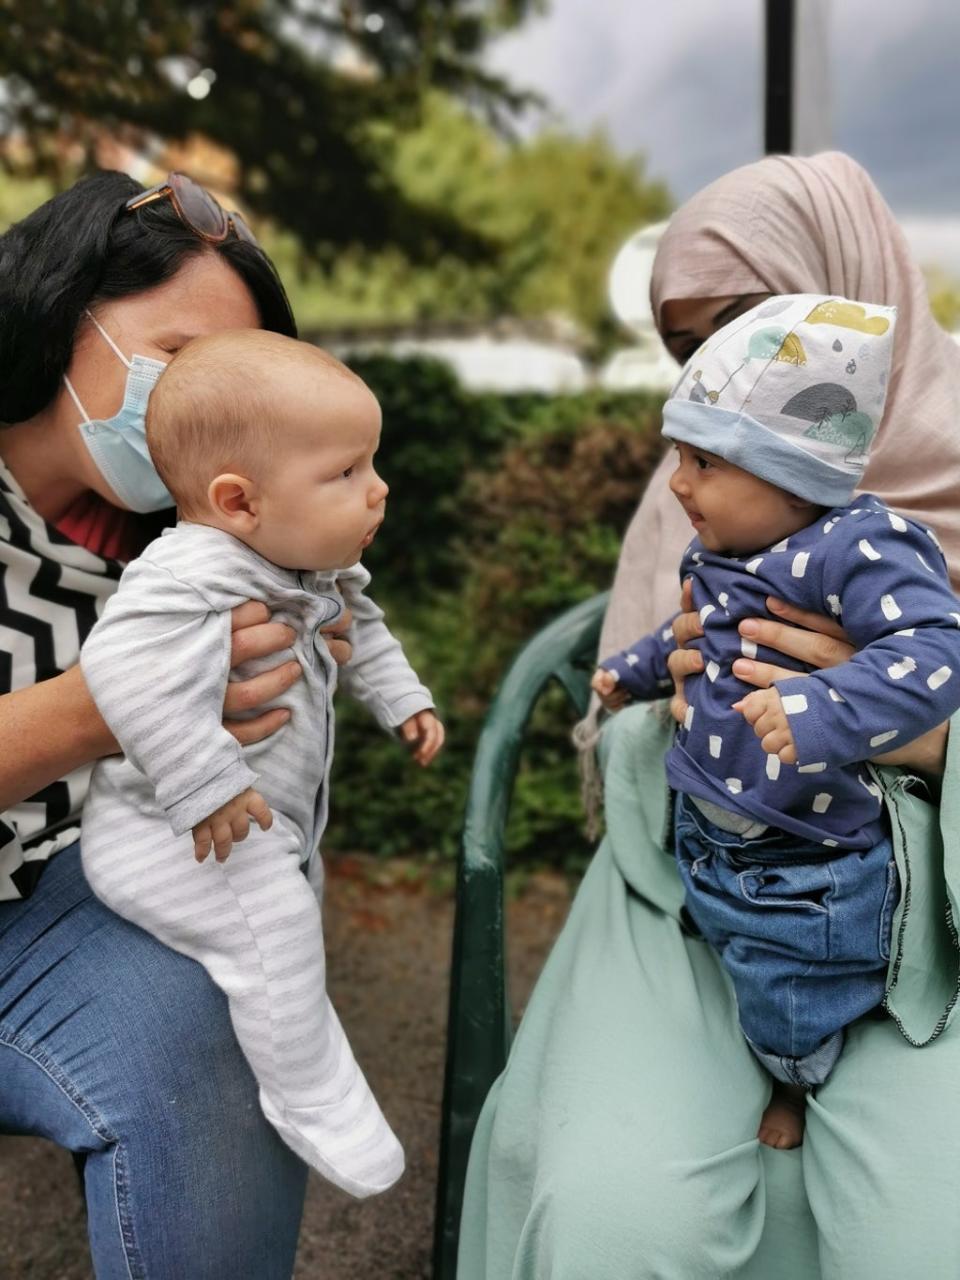 Alexandra Kenchington with her four-month old son, Barney, looking at the four-month old daughter, Madiha, of Afghan refugees (Matt Simmons/PA).